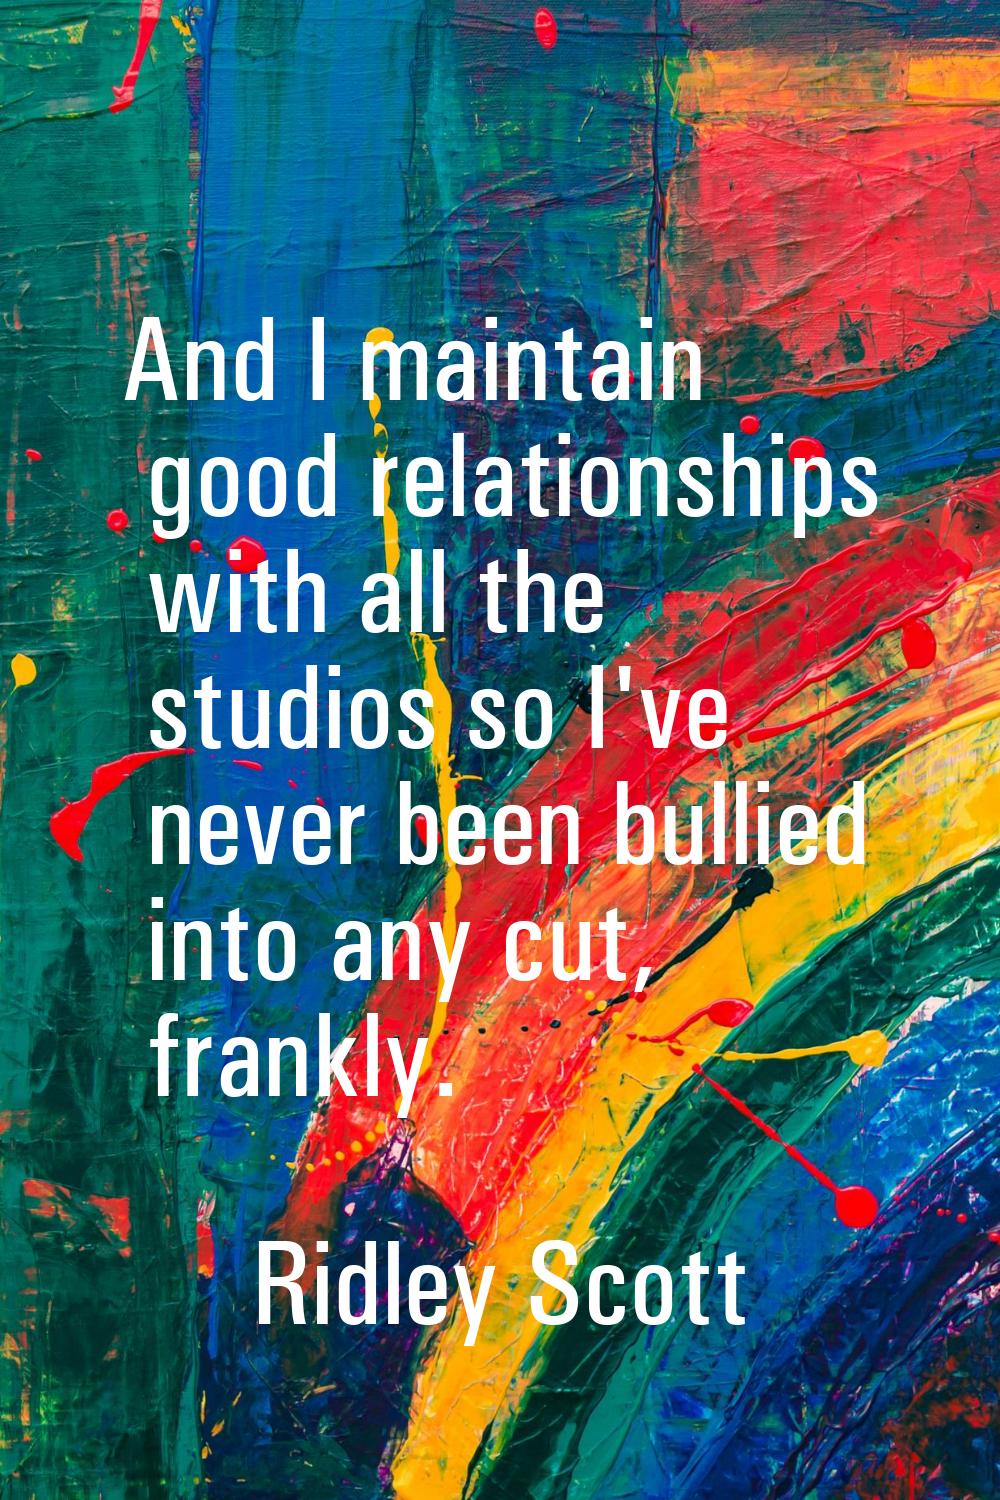 And I maintain good relationships with all the studios so I've never been bullied into any cut, fra